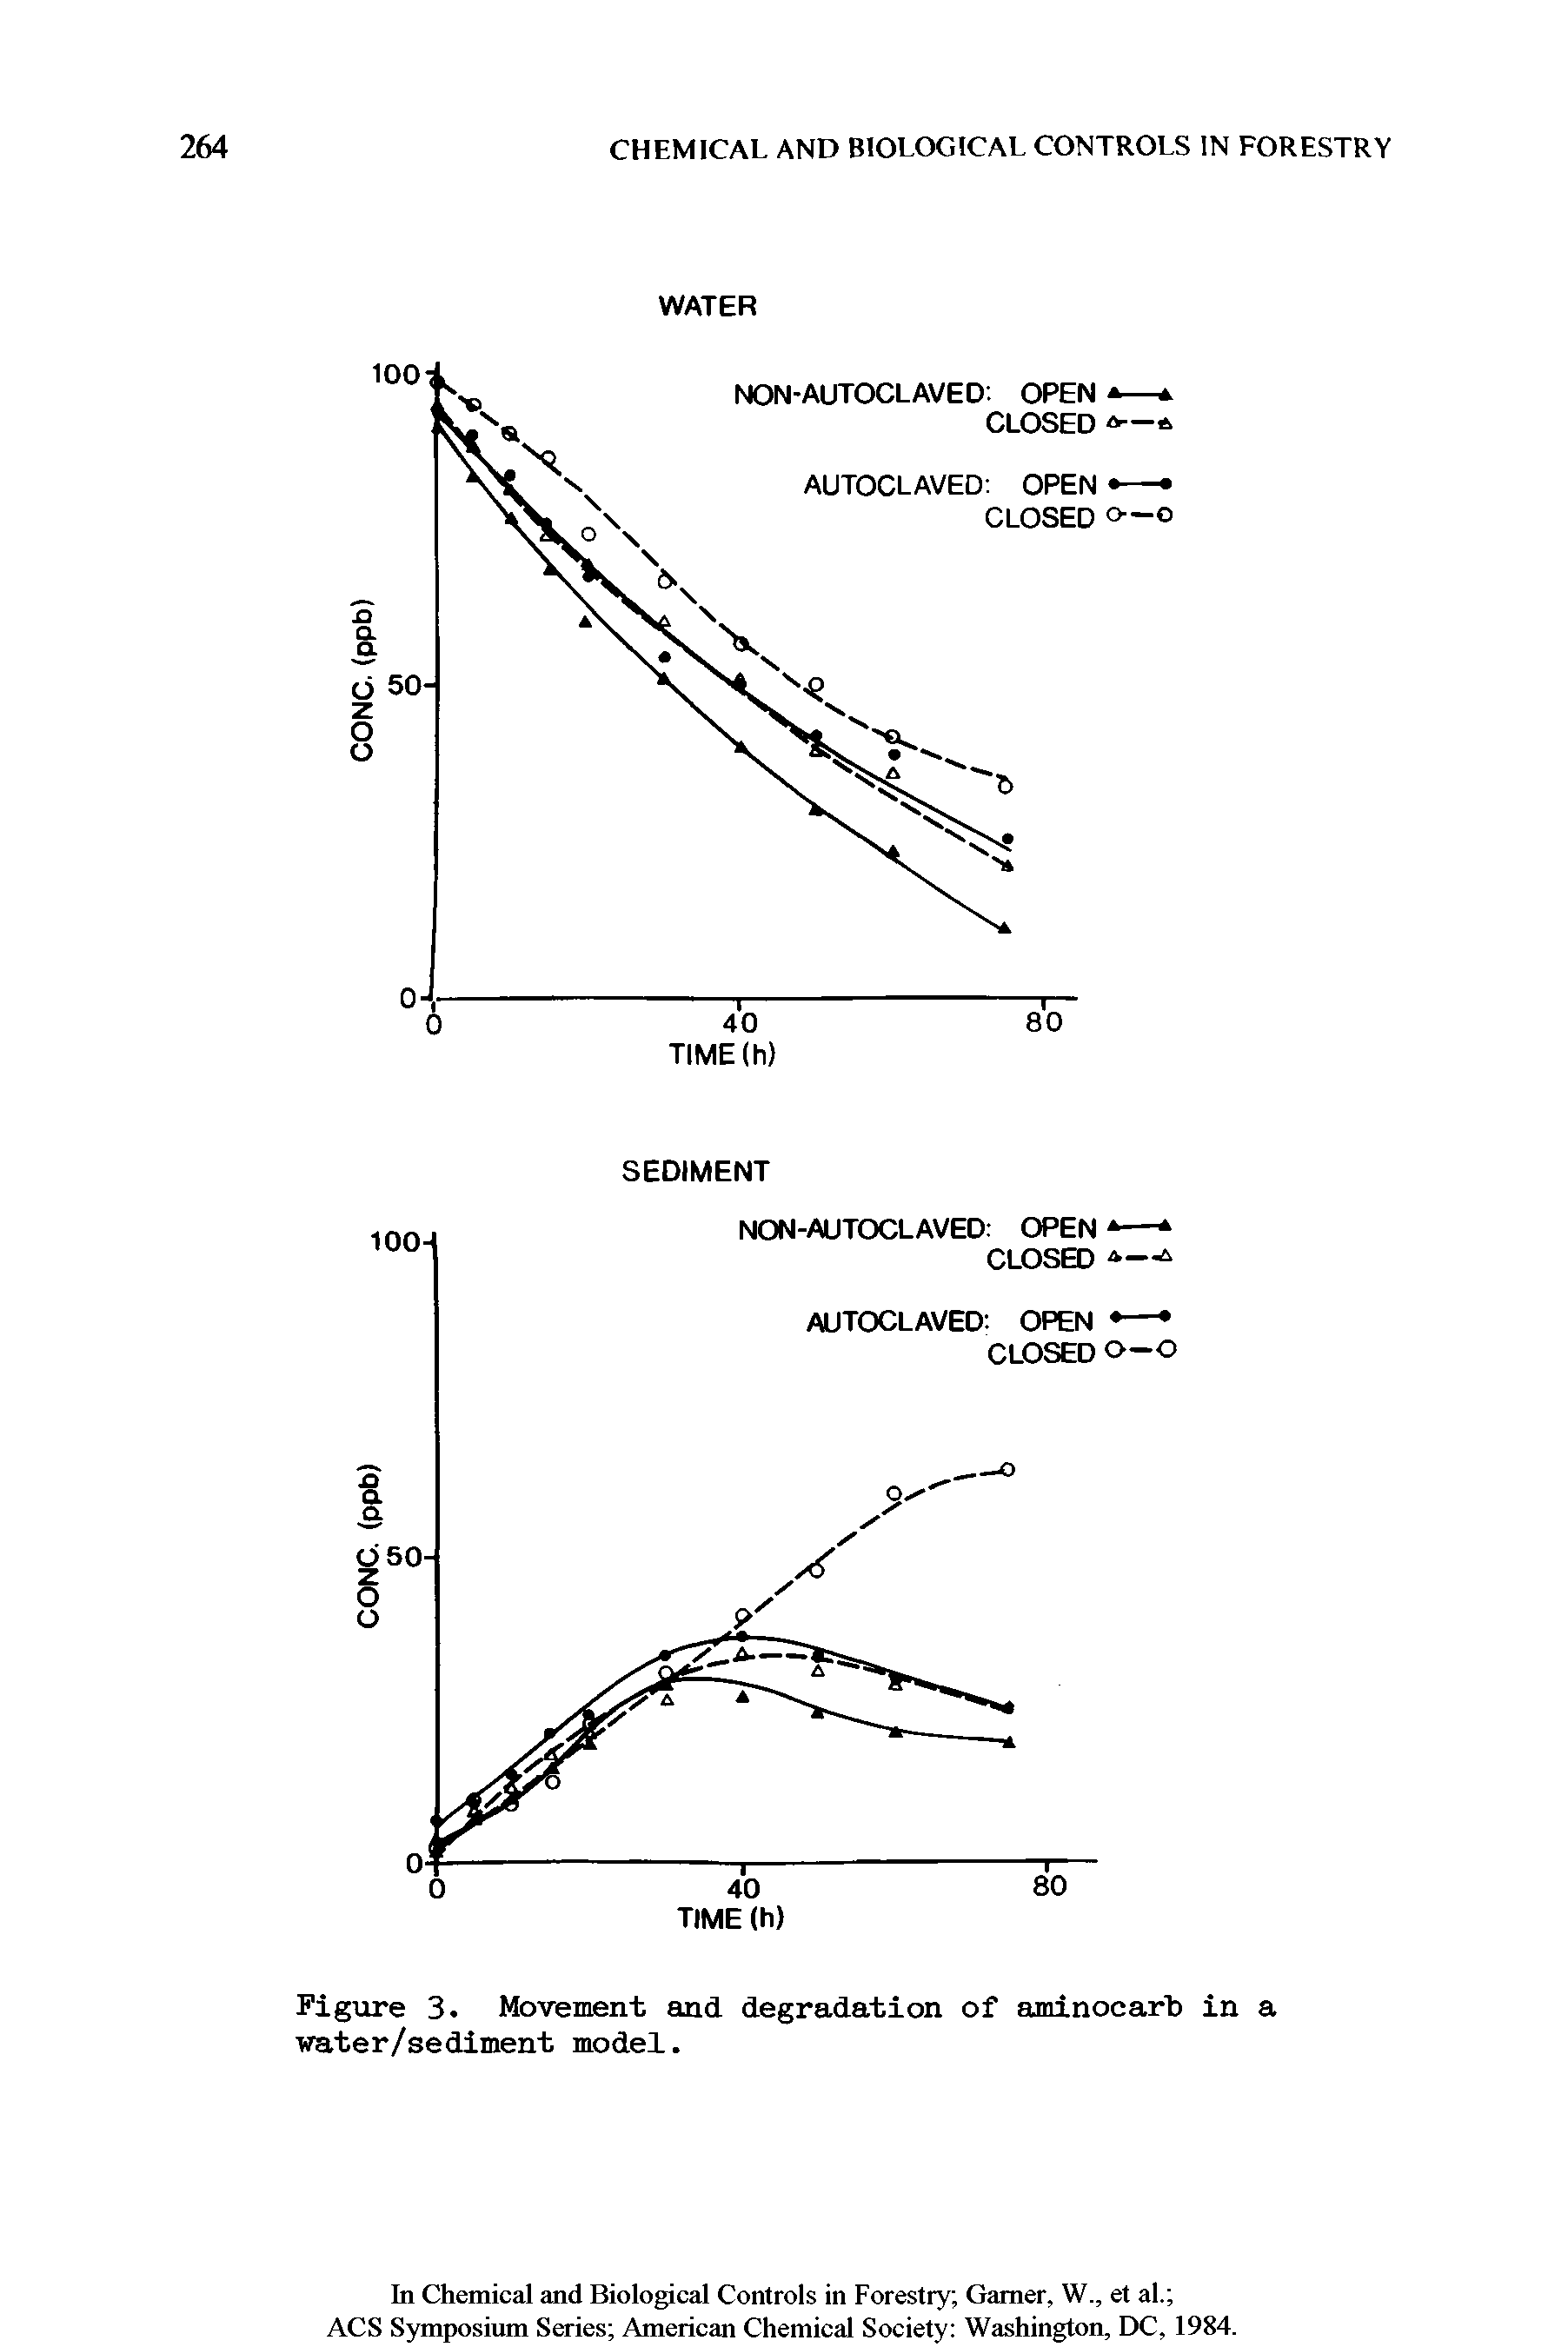 Figure 3. Movement and degradation of aminocarb in a water/sediment model.